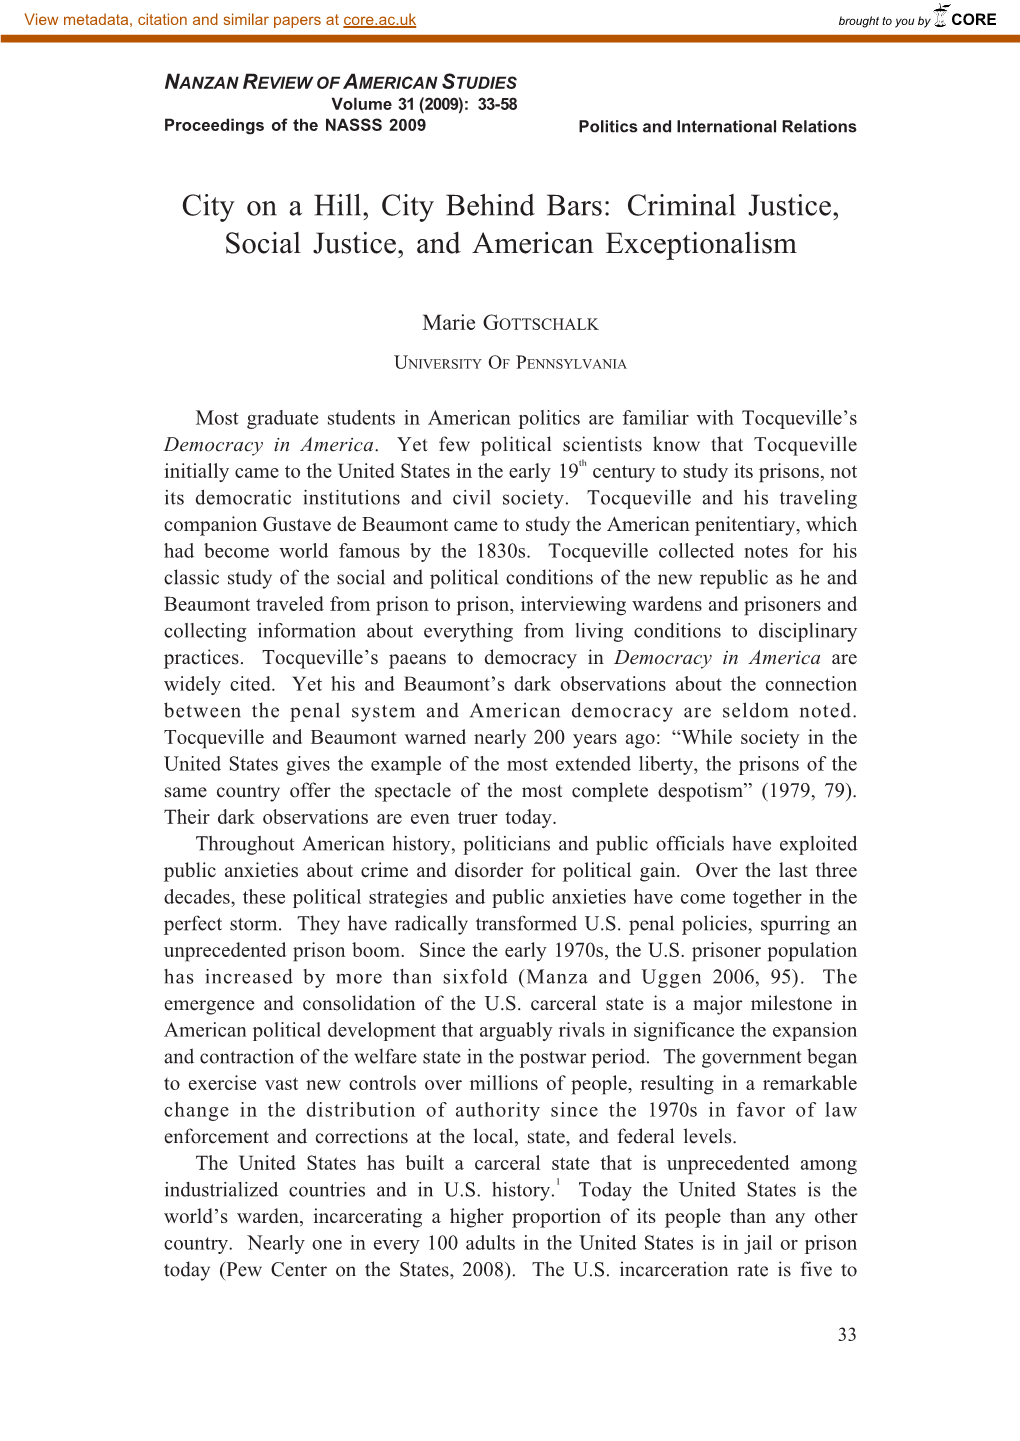 City on a Hill, City Behind Bars: Criminal Justice, Social Justice, and American Exceptionalism